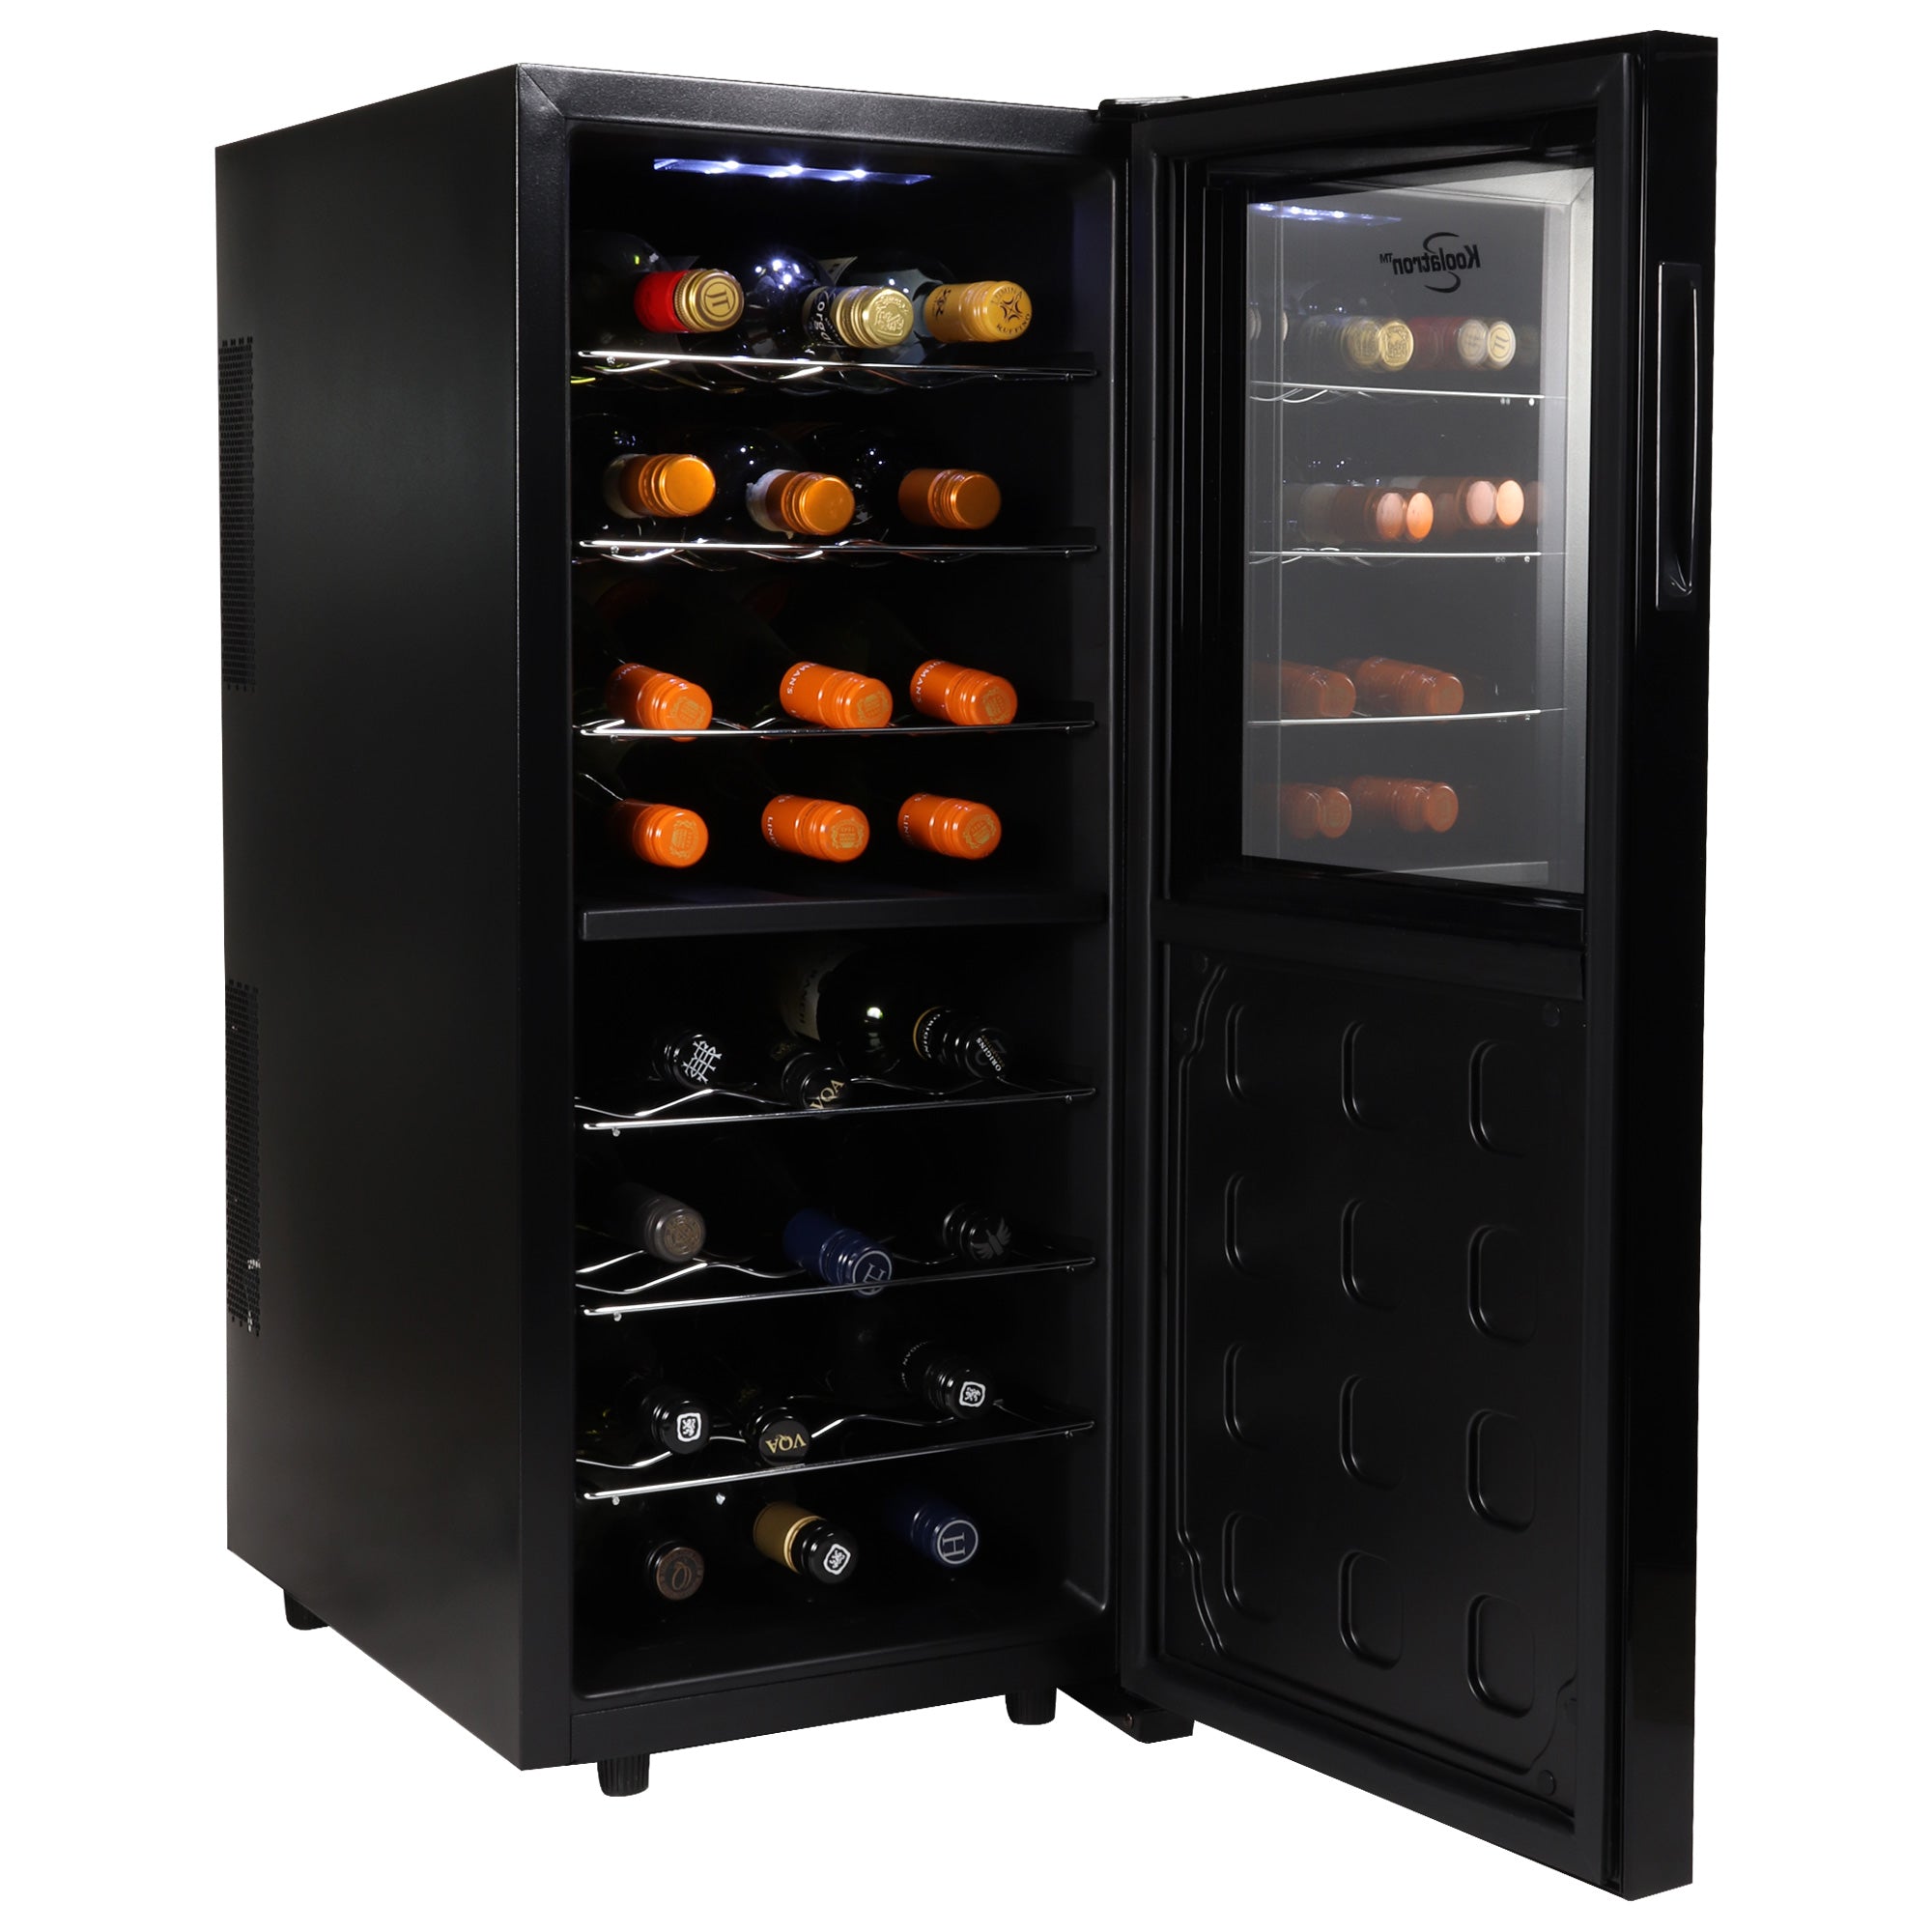 Koolatron 24 bottle dual zone wine cooler, open with bottles of wine inside, on a white background